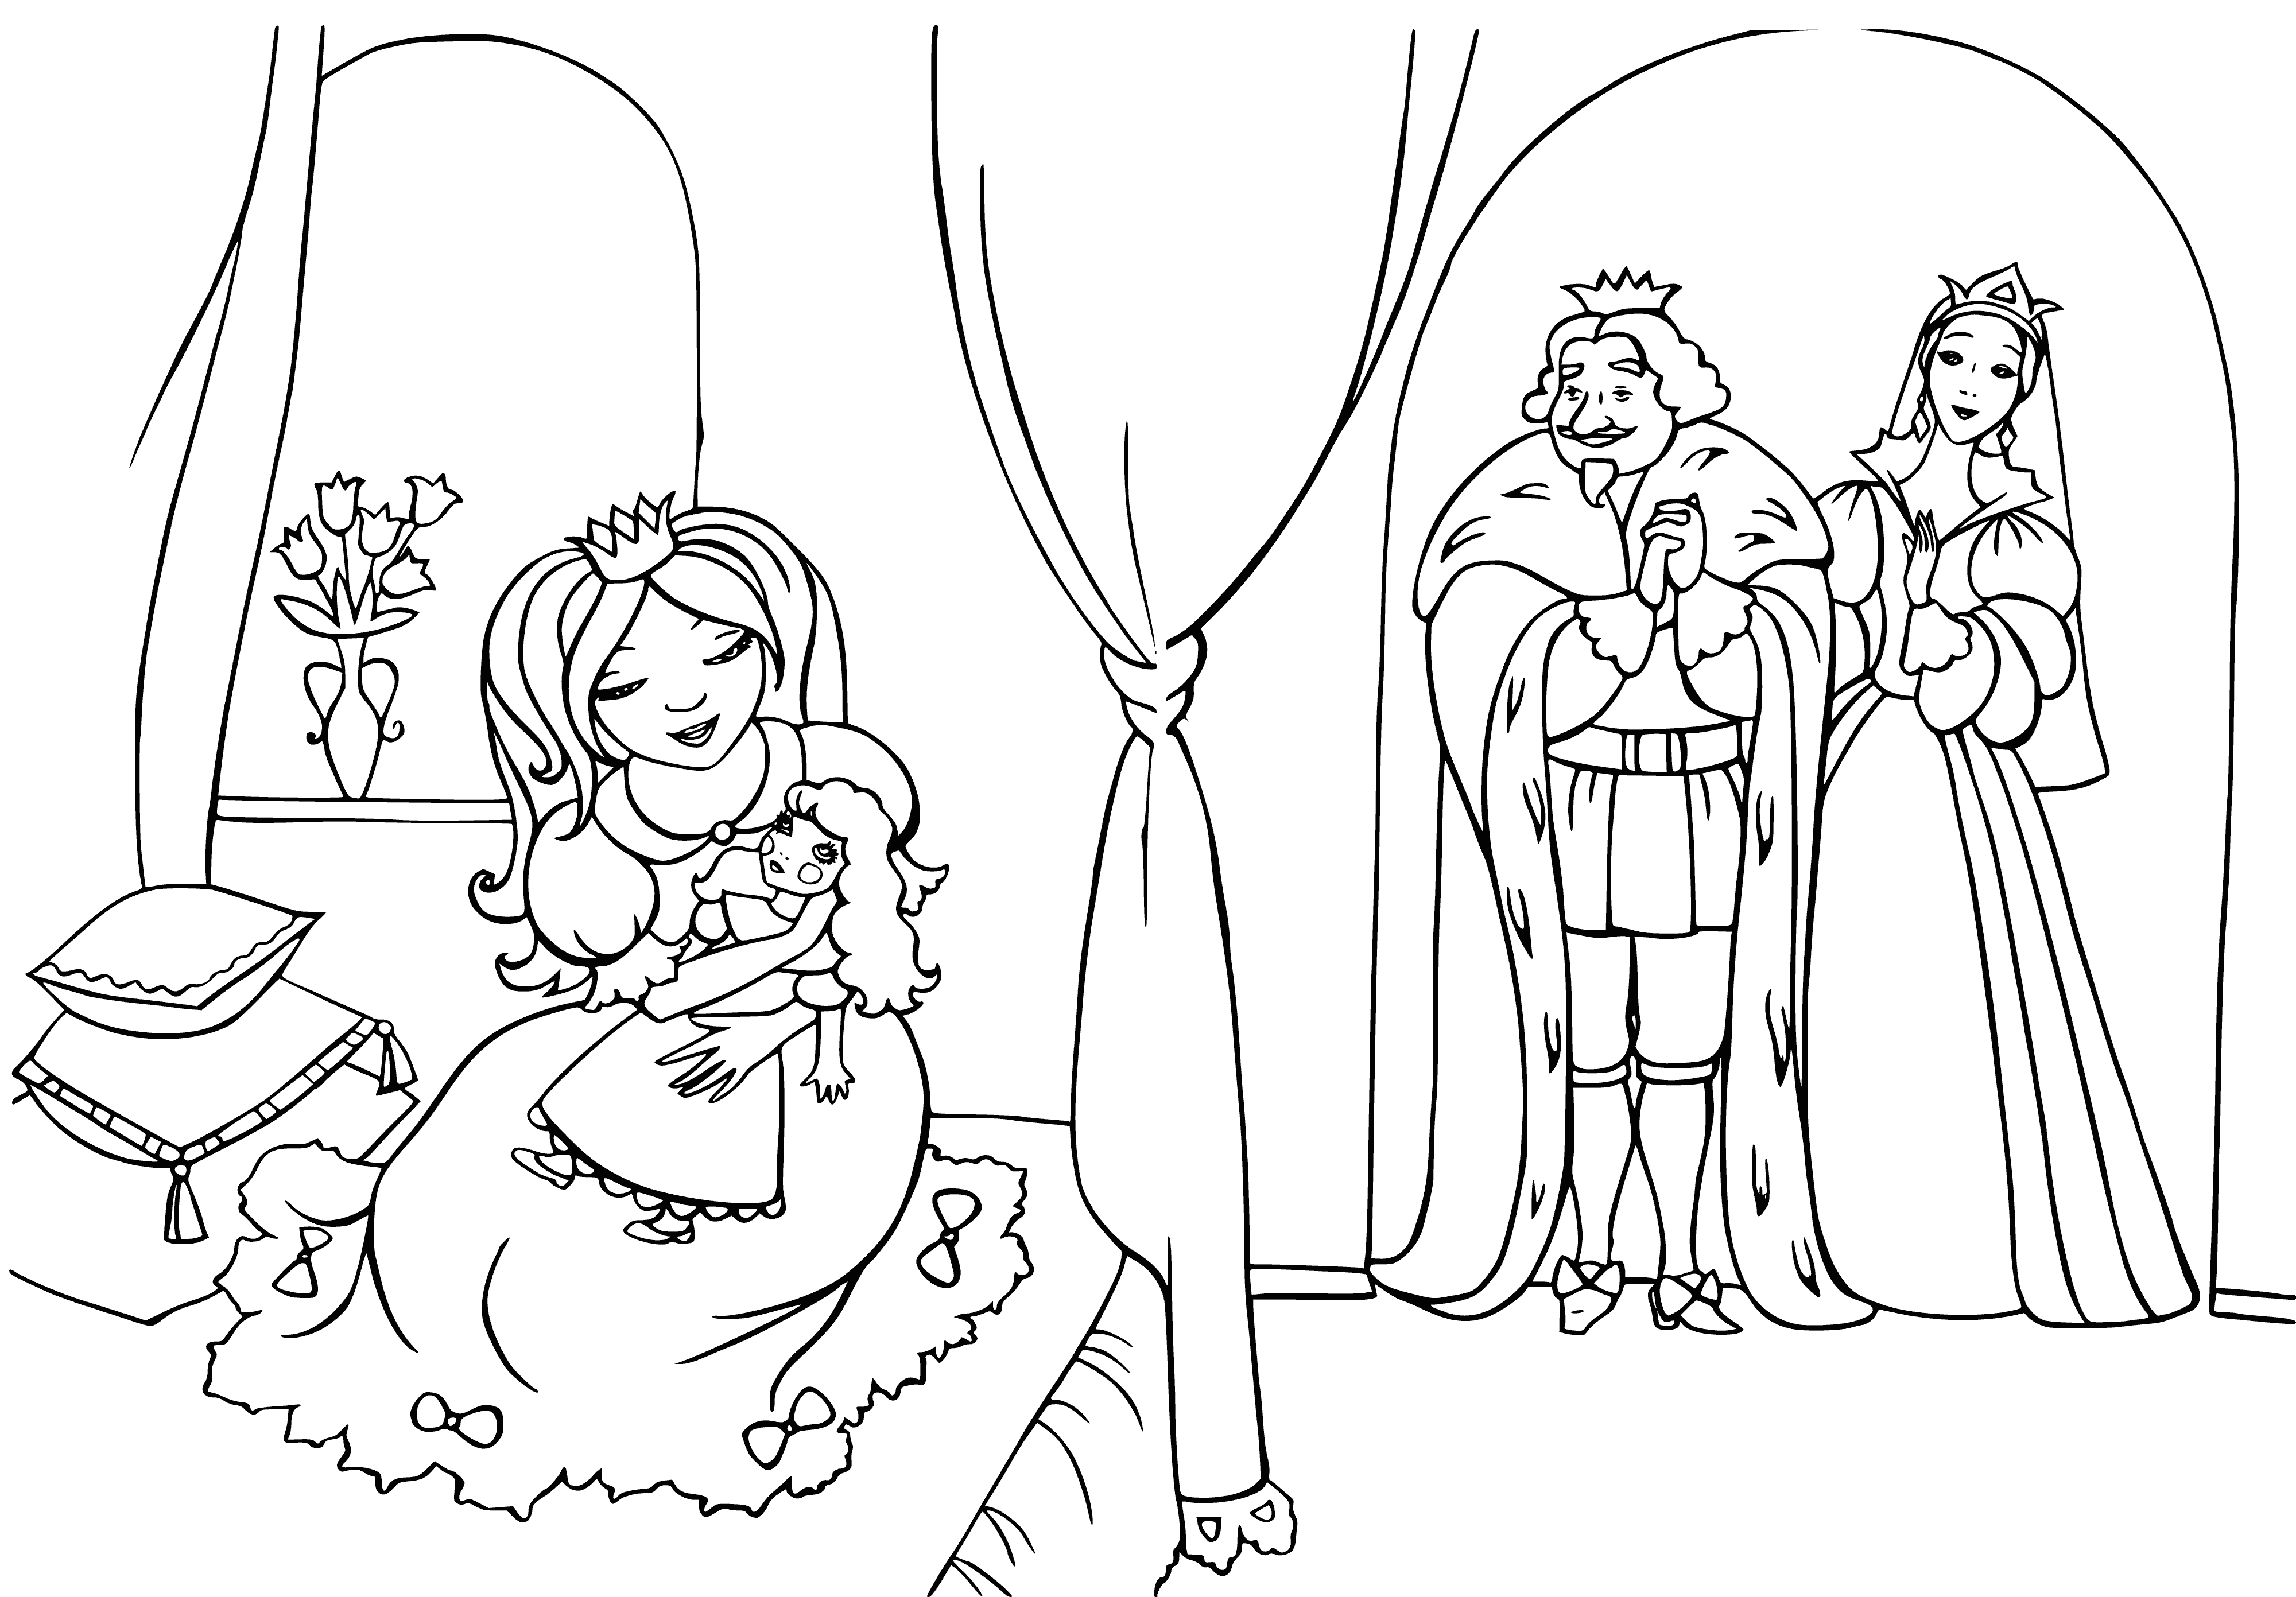 coloring page: Wonderful fairy kingdom with a castle, trees & flowers, plus tiny winged fairies playing & flitting about! #fairytale